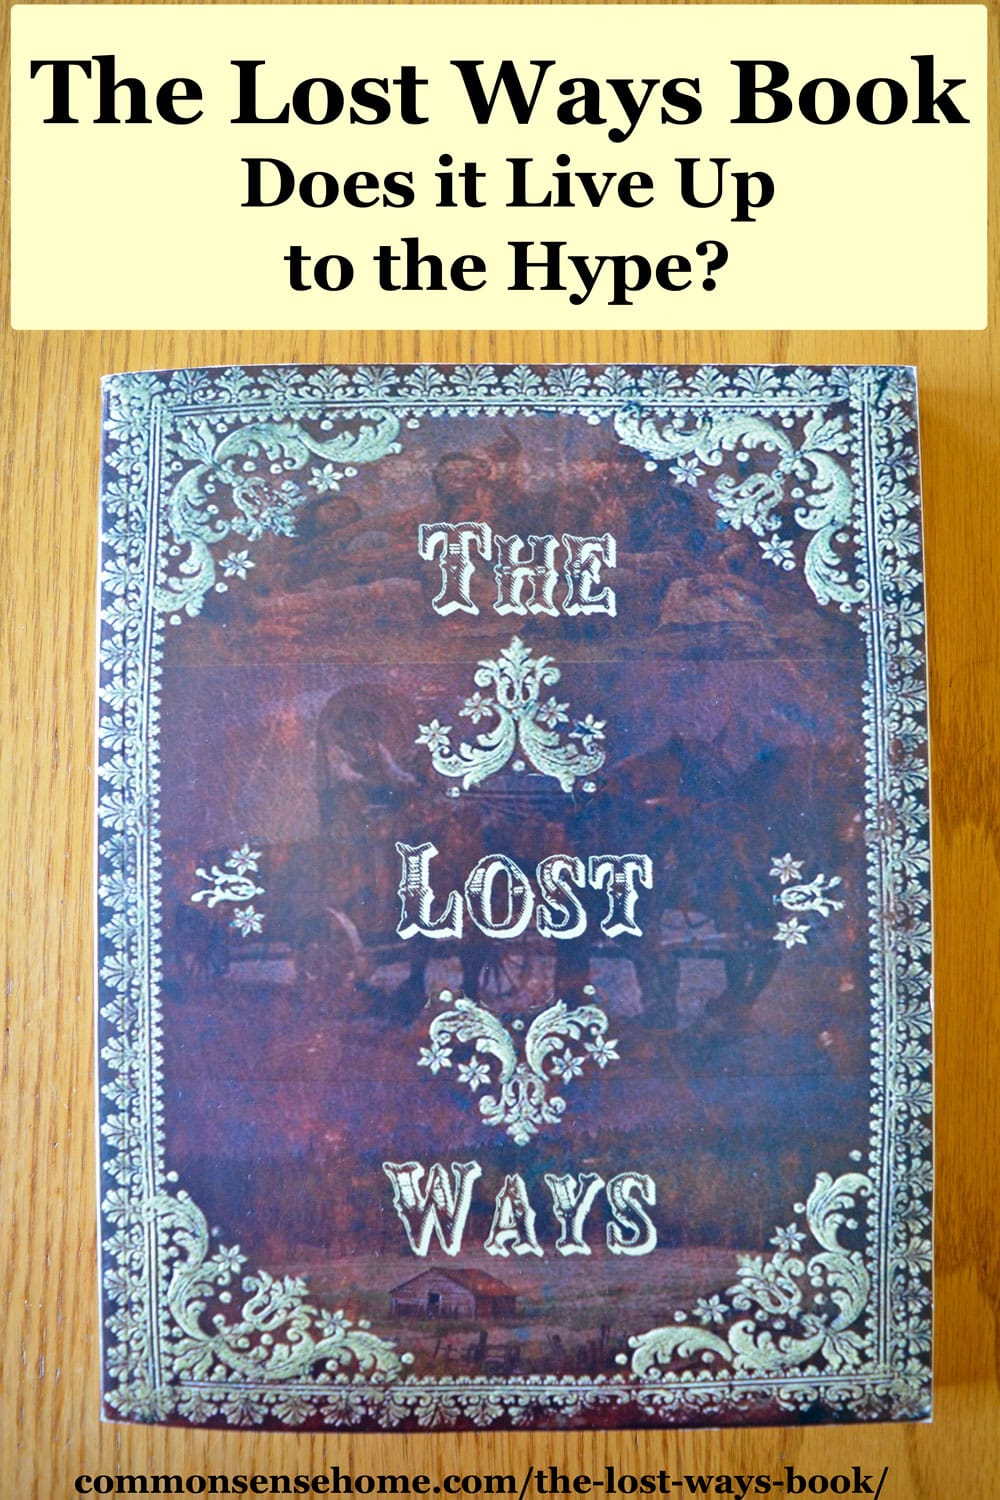 text "The Lost Ways Book - Does it Live Up to the Hype?" with book below